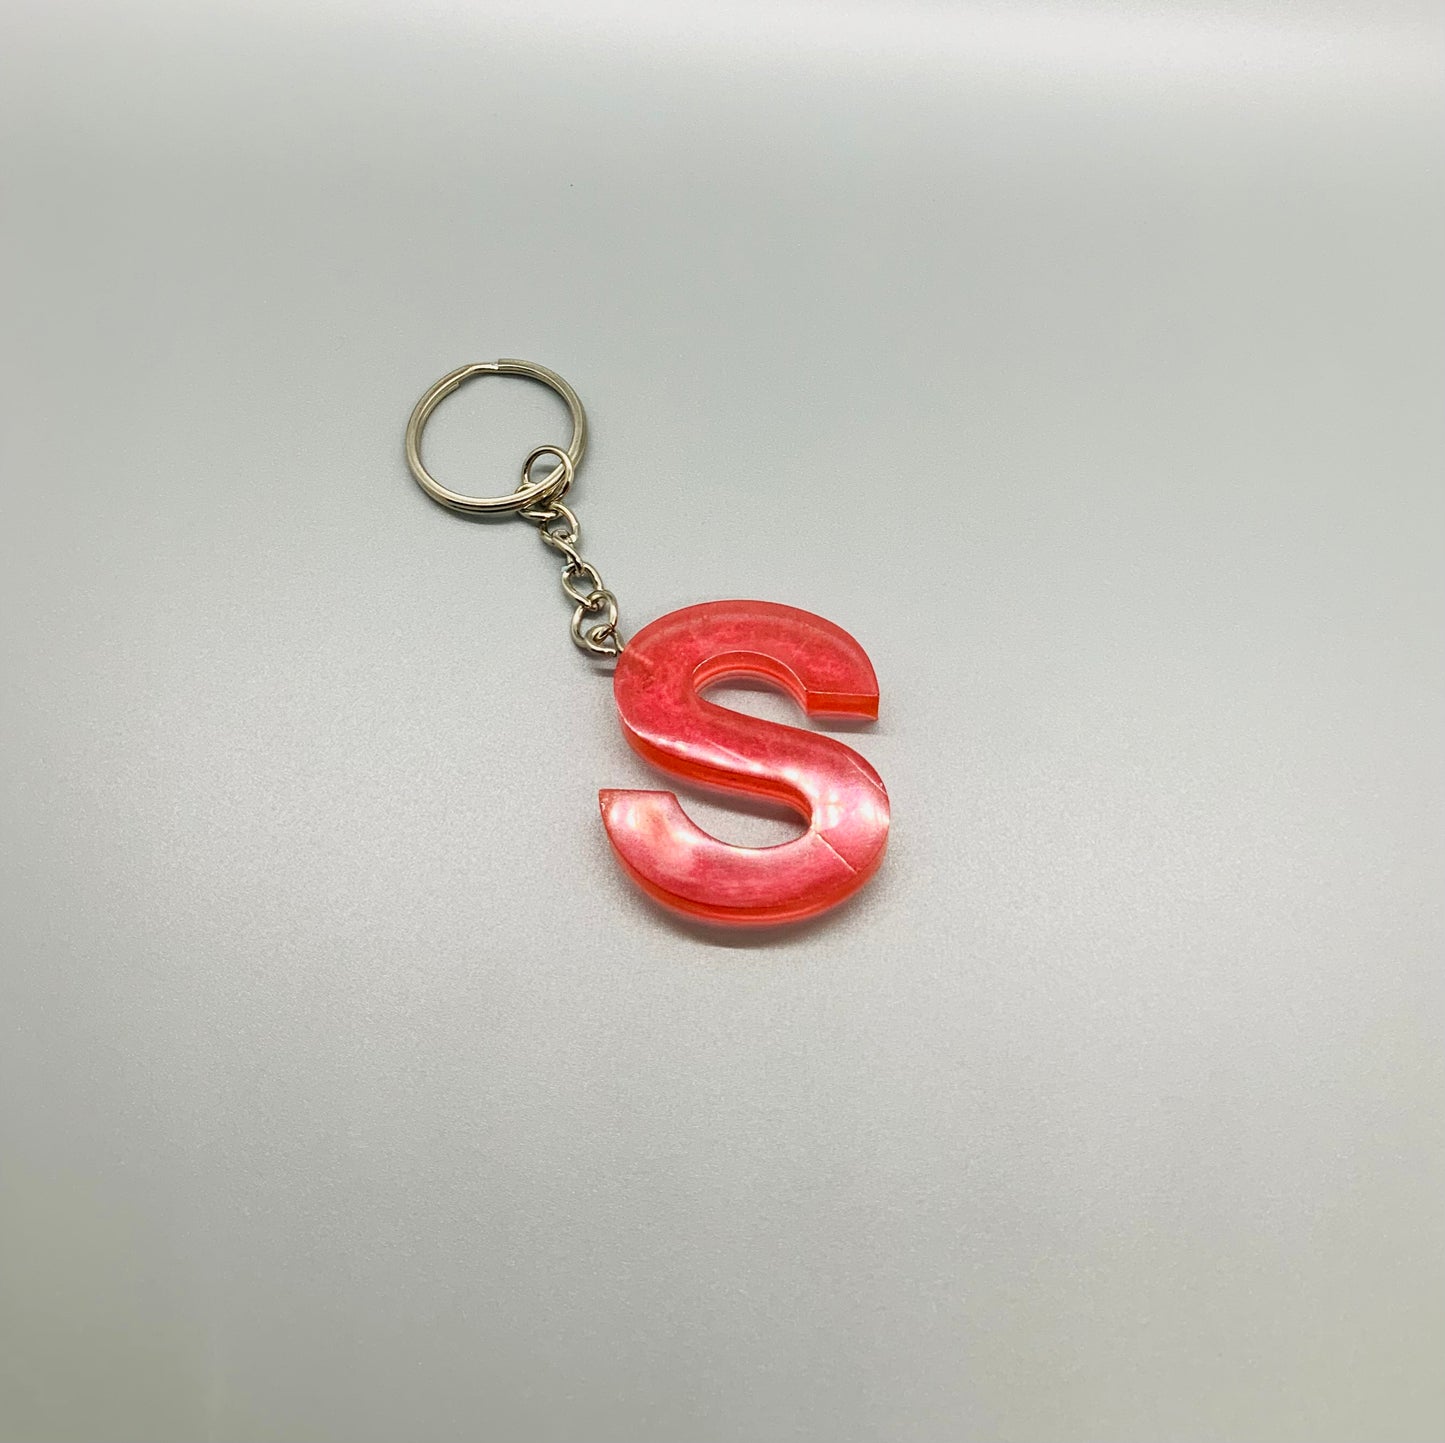 The Letter "S" Keychain - BeautiesbyHand